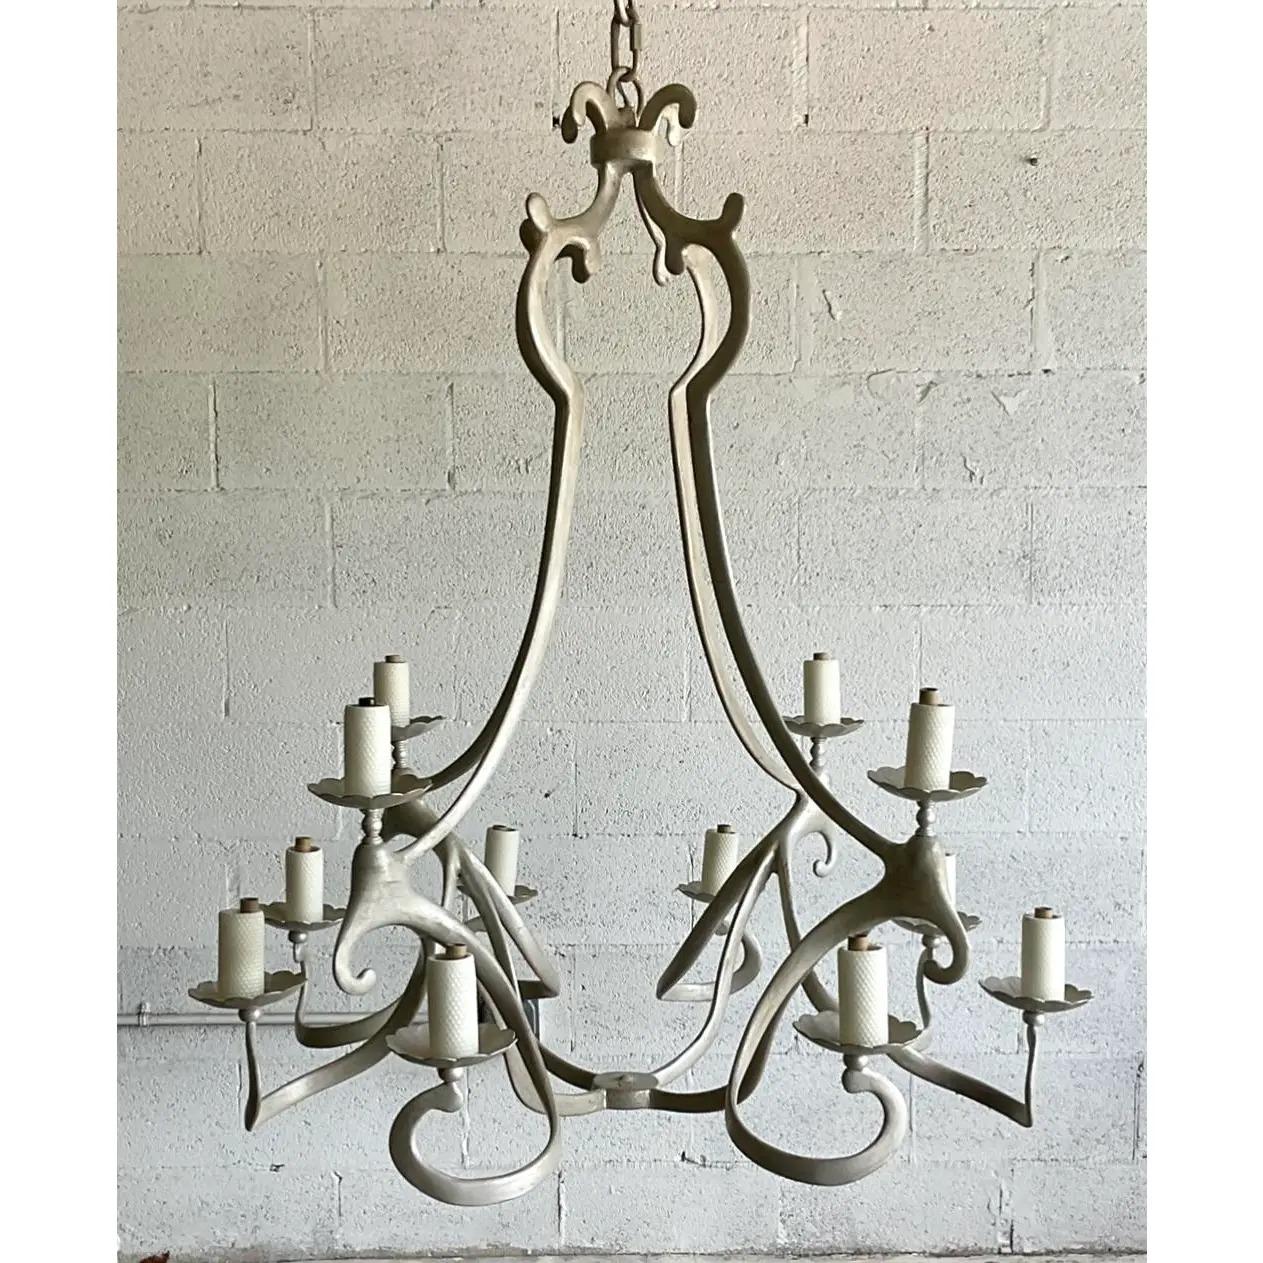 Spectacular vintage Contemporary biomorphic chandelier. Made by the iconic Niermann Weeks group. A 12 arm monumental shape with a Veronese silver leaf finish. Acquired from a Palm Beach estate.

The chandelier is in great vintage condition. Minor